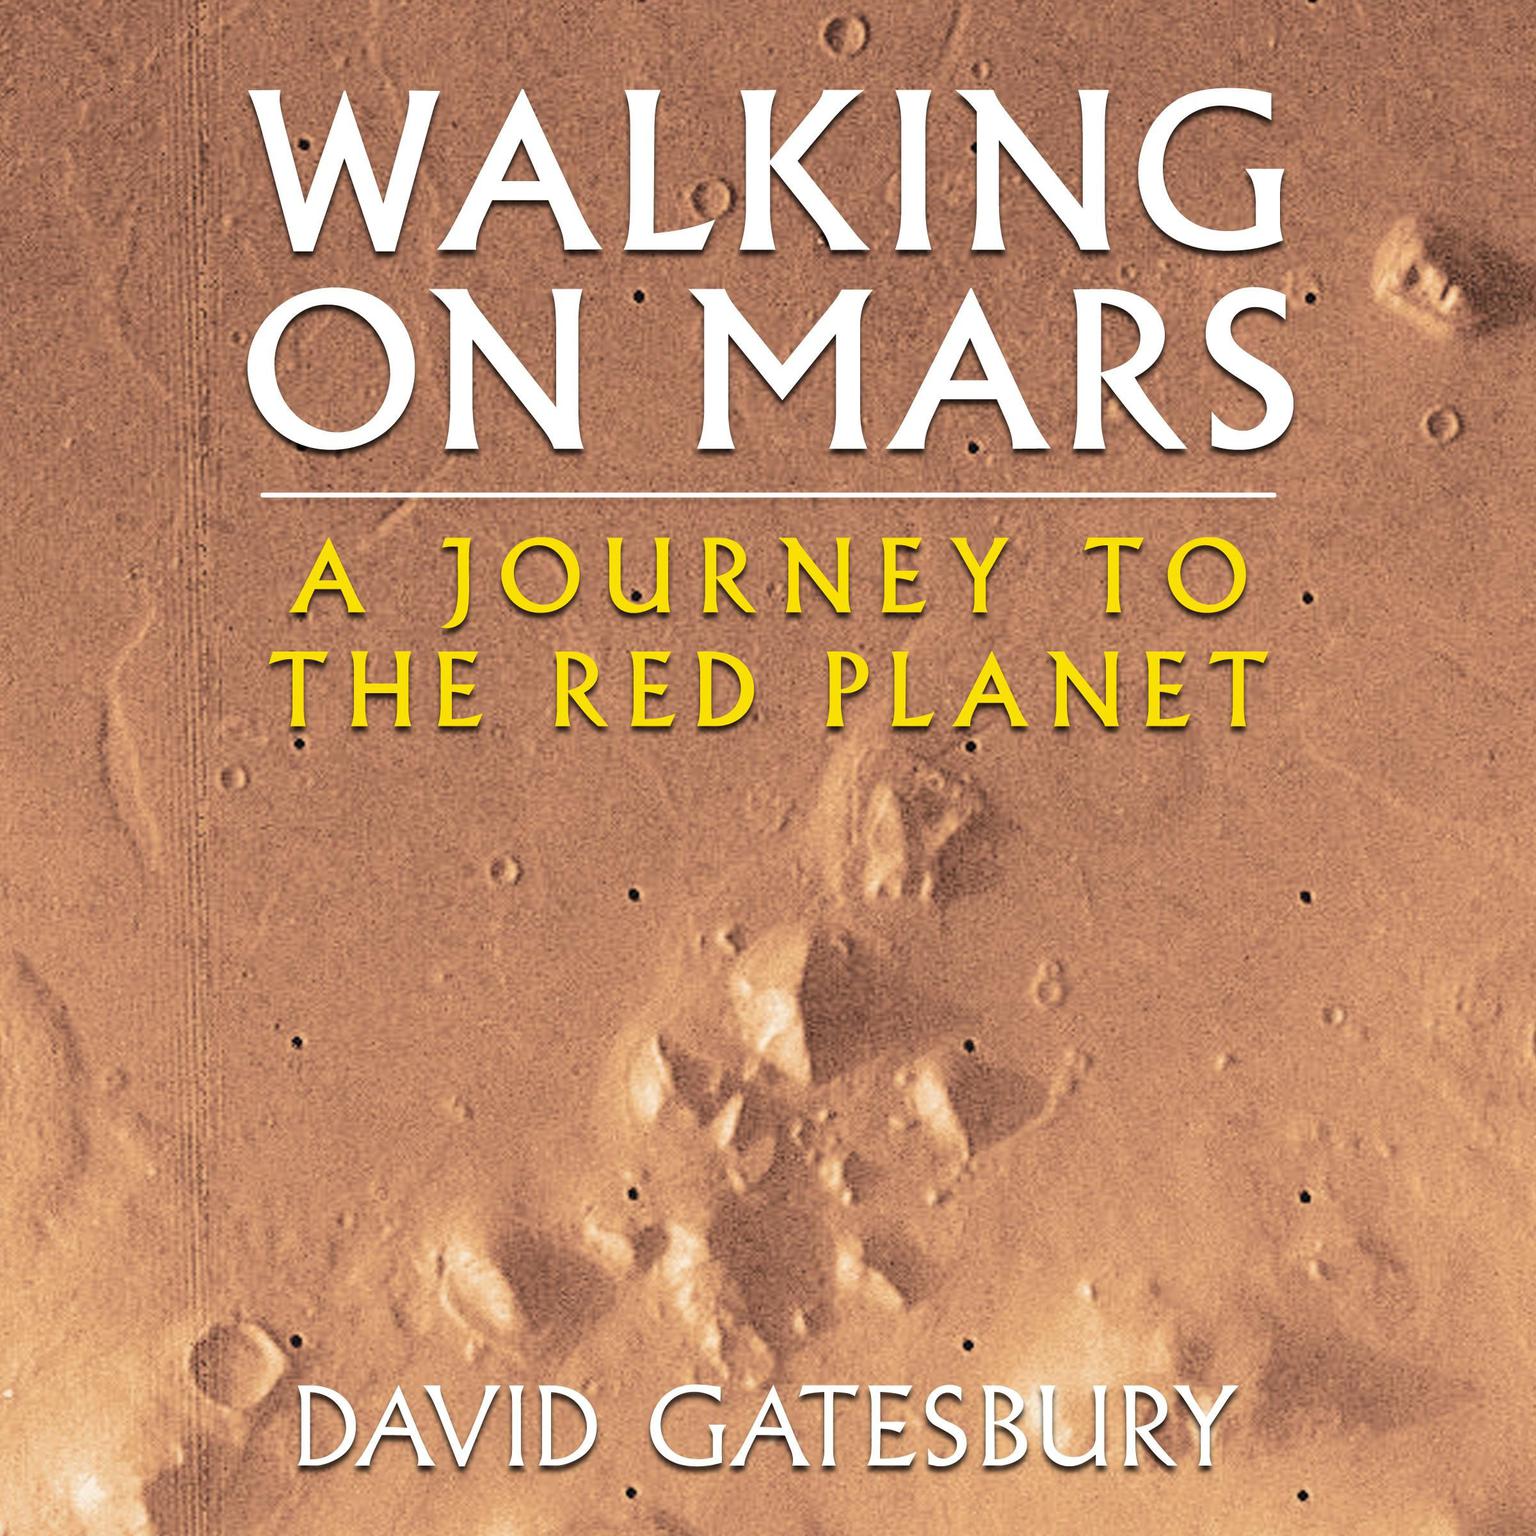 Walking on Mars: A Journey to the Red Planet Audiobook, by David Gatesbury